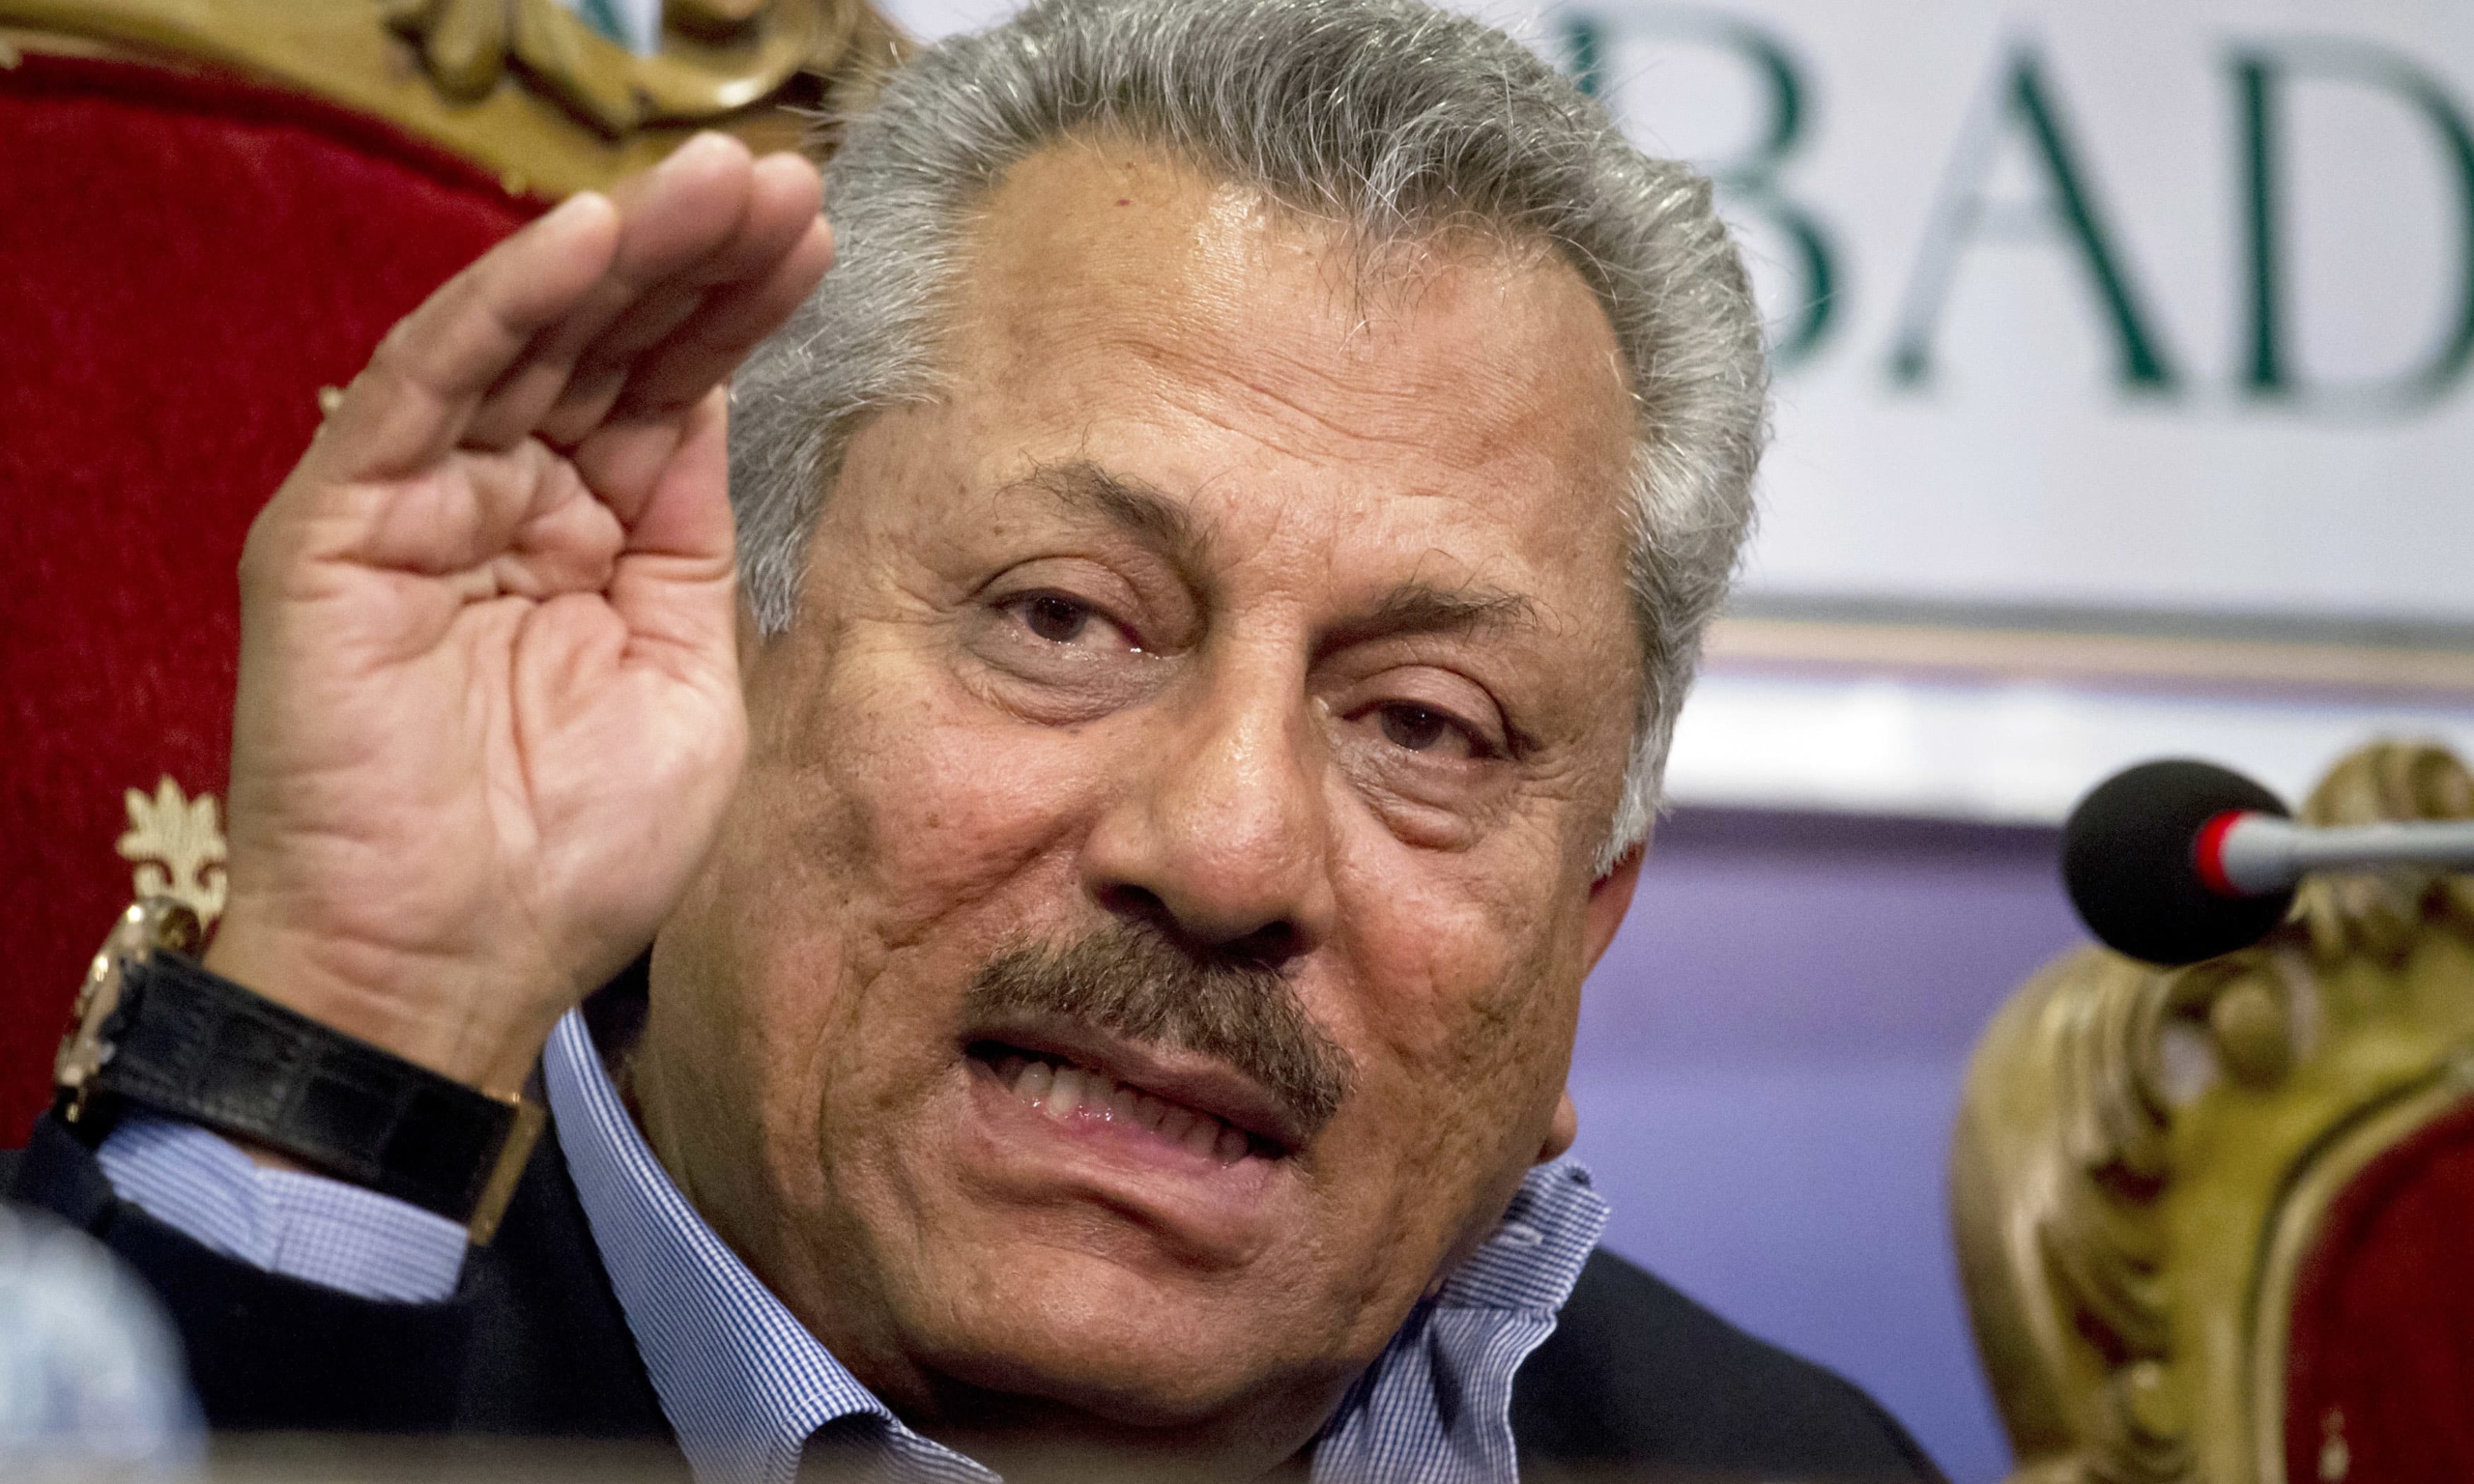 Zaheer Abbas introduced in ICC Cricket Hall of Fame. Image: Dawn